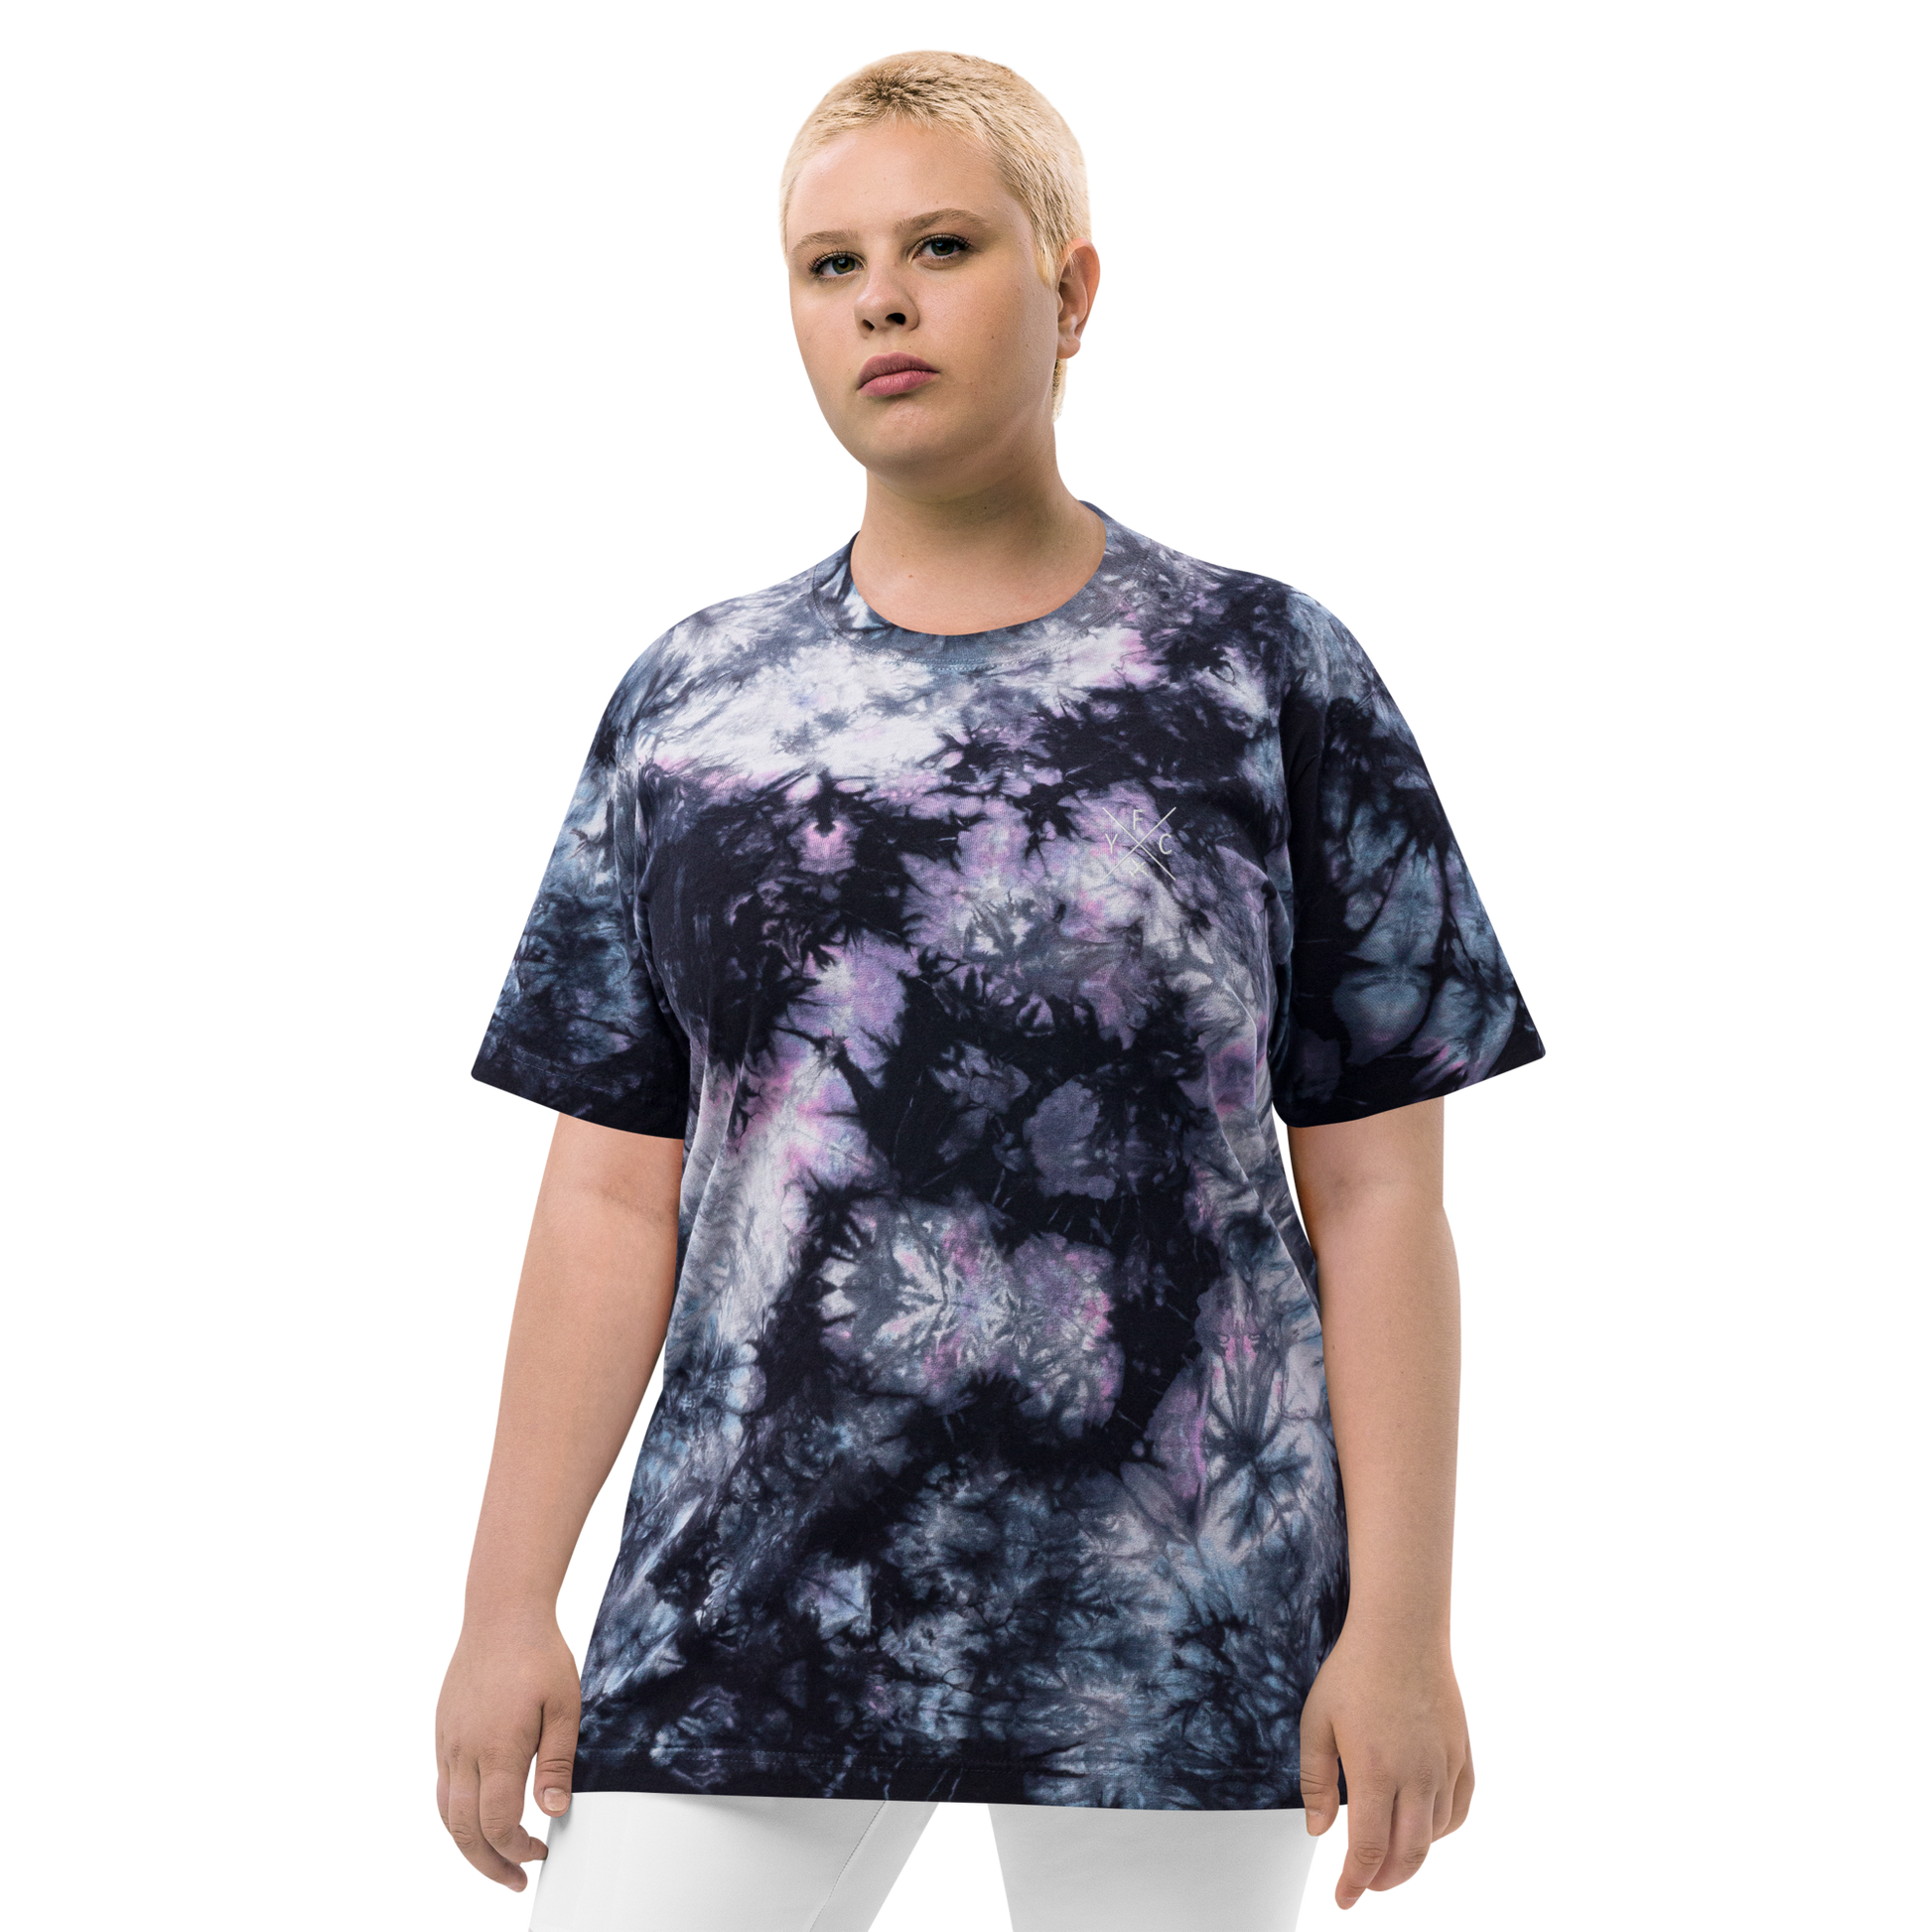 YHM Designs - YFC Fredericton Oversized Tie-Dye T-Shirt - Crossed-X Design with Airport Code and Vintage Propliner - White Embroidery - Image 05